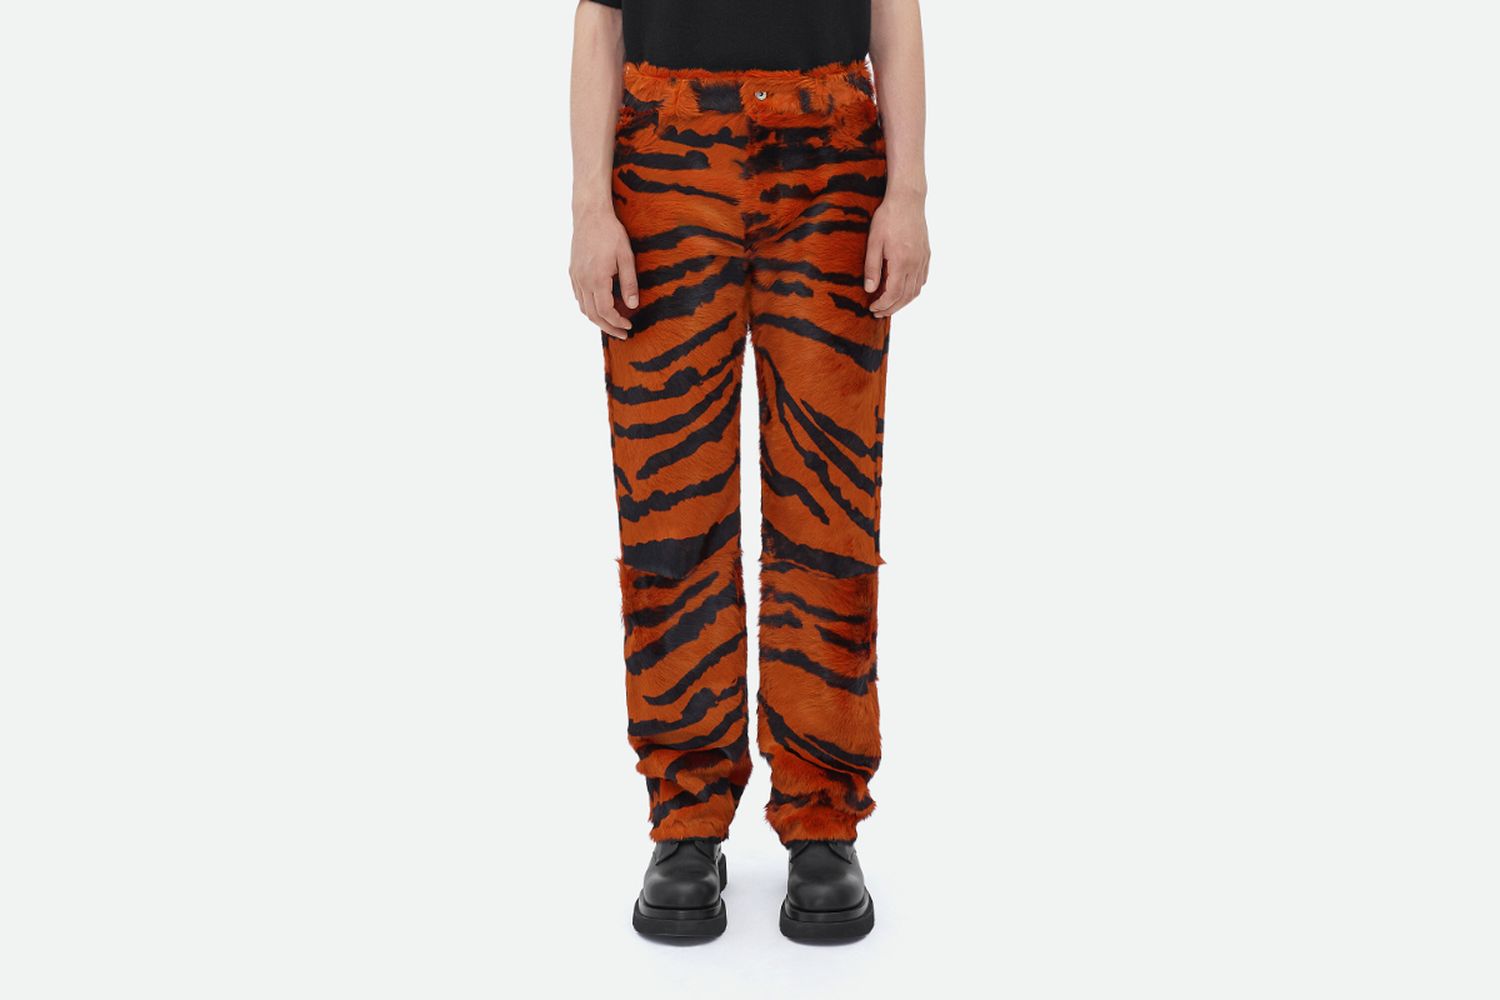 A$AP Rocky's Tiger Pants Are Statement Style At its Best